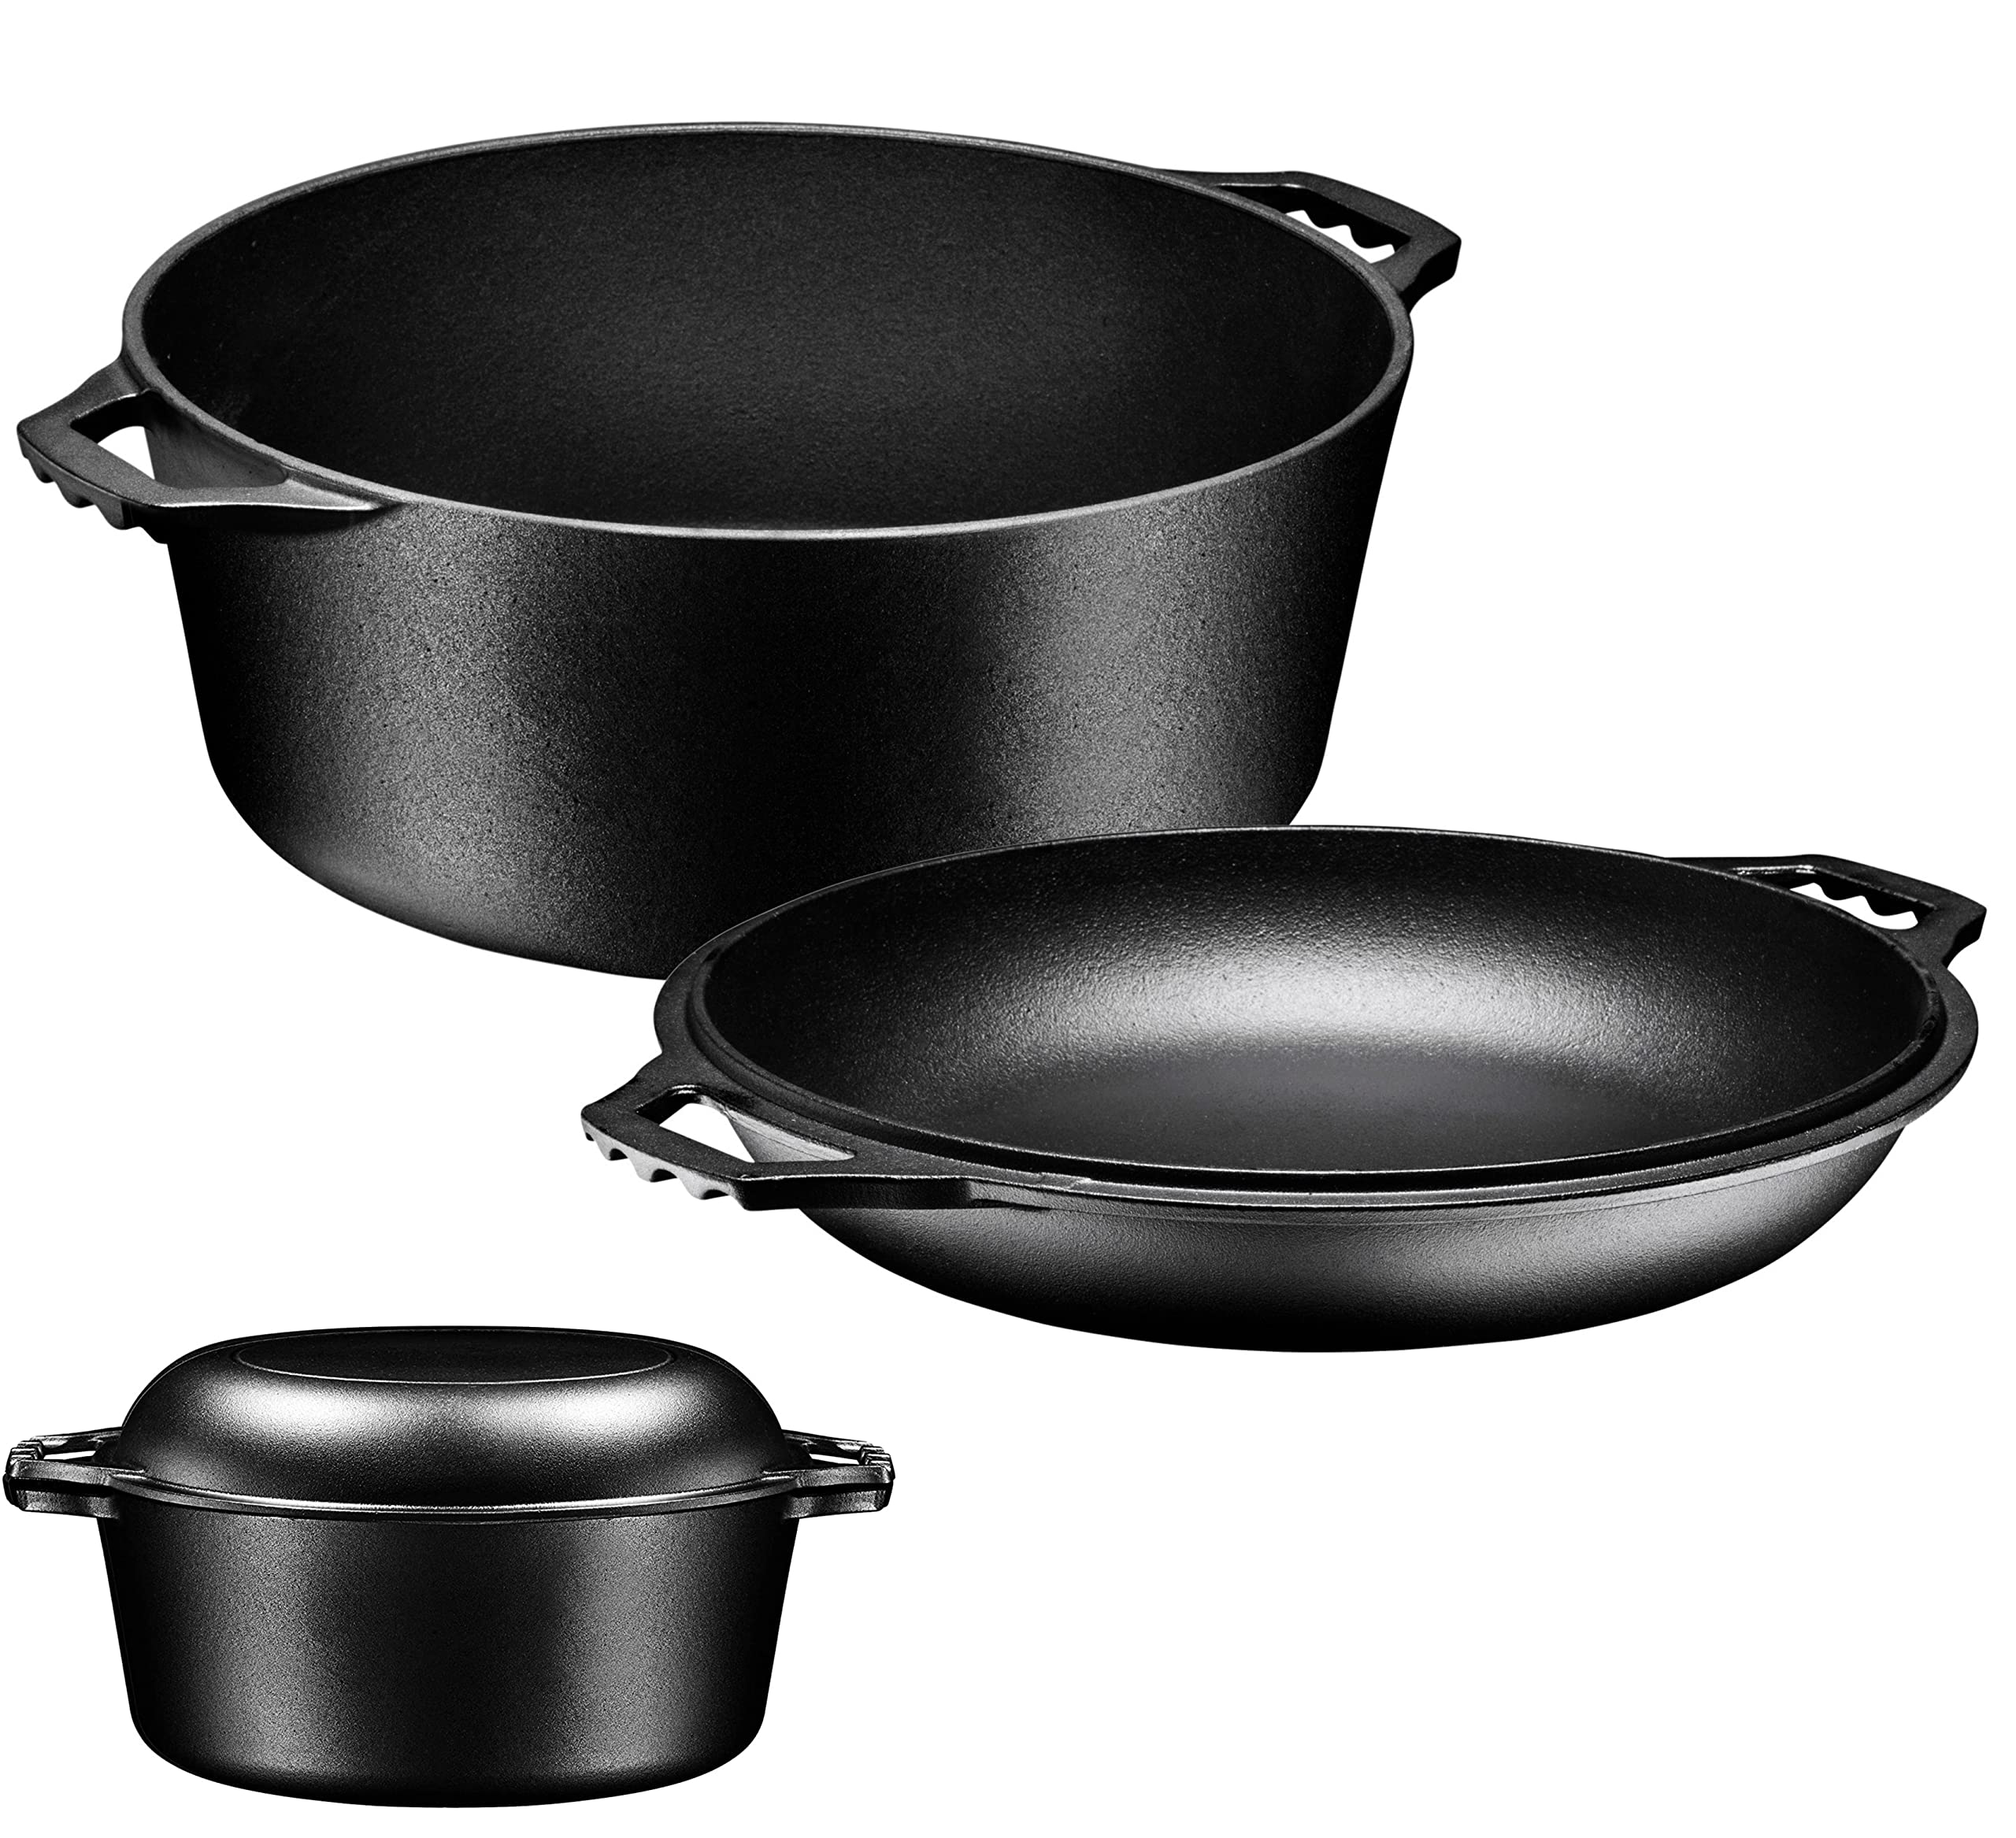 Bruntmor 4 Piece Camping Cooking Set with Bag - Pre Seasoned Cast Iron Pots & Pans